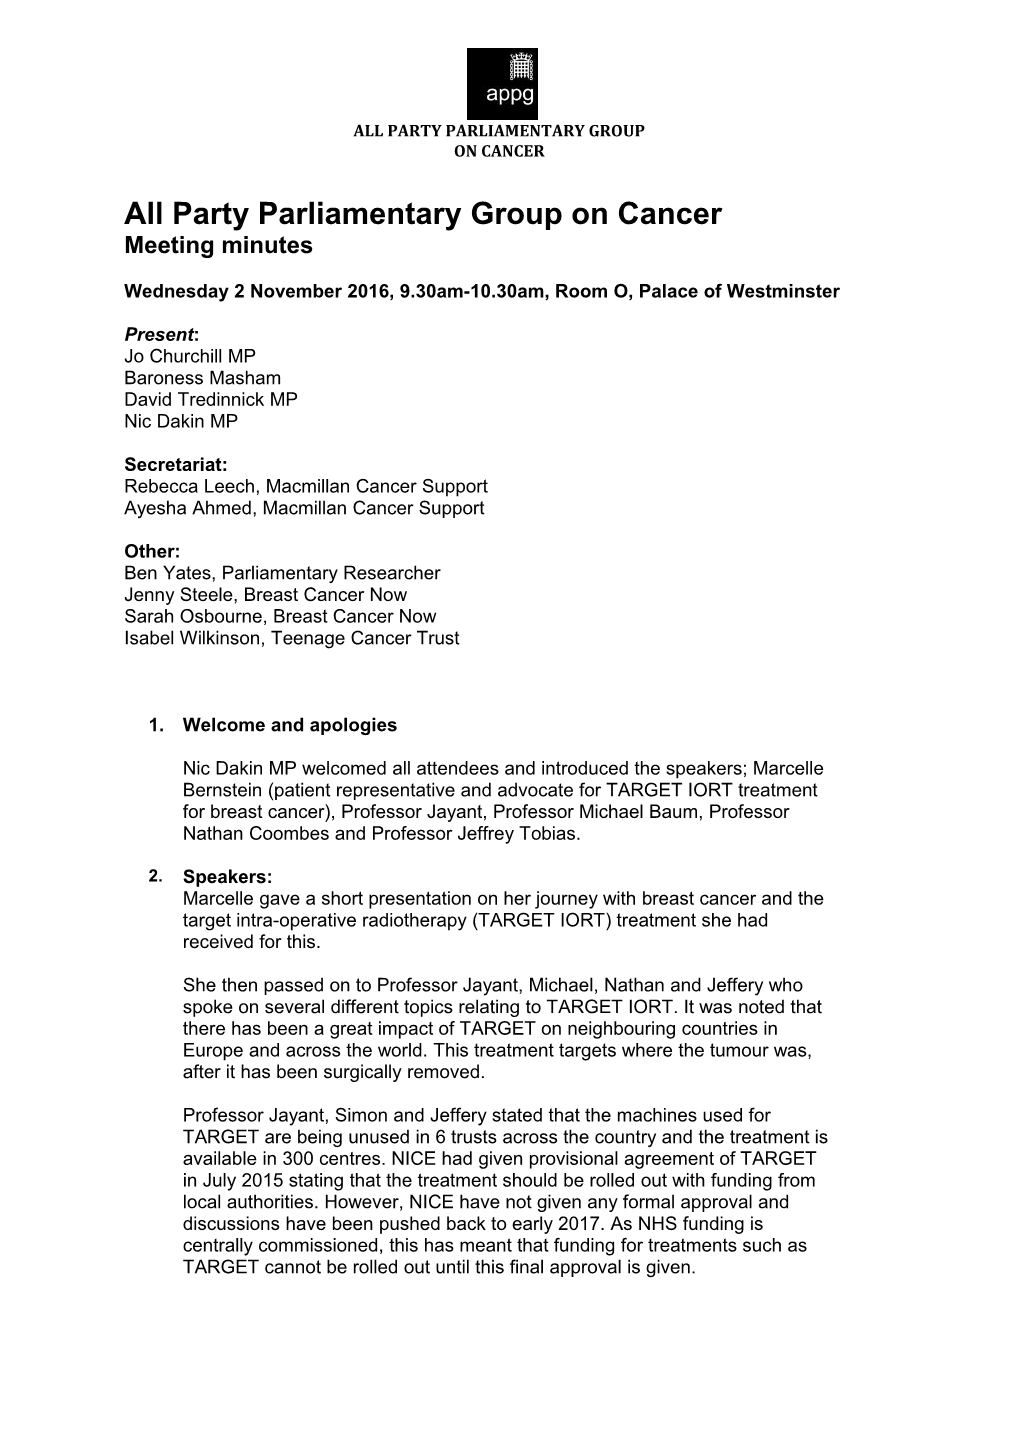 All Party Parliamentary Group on Cancer